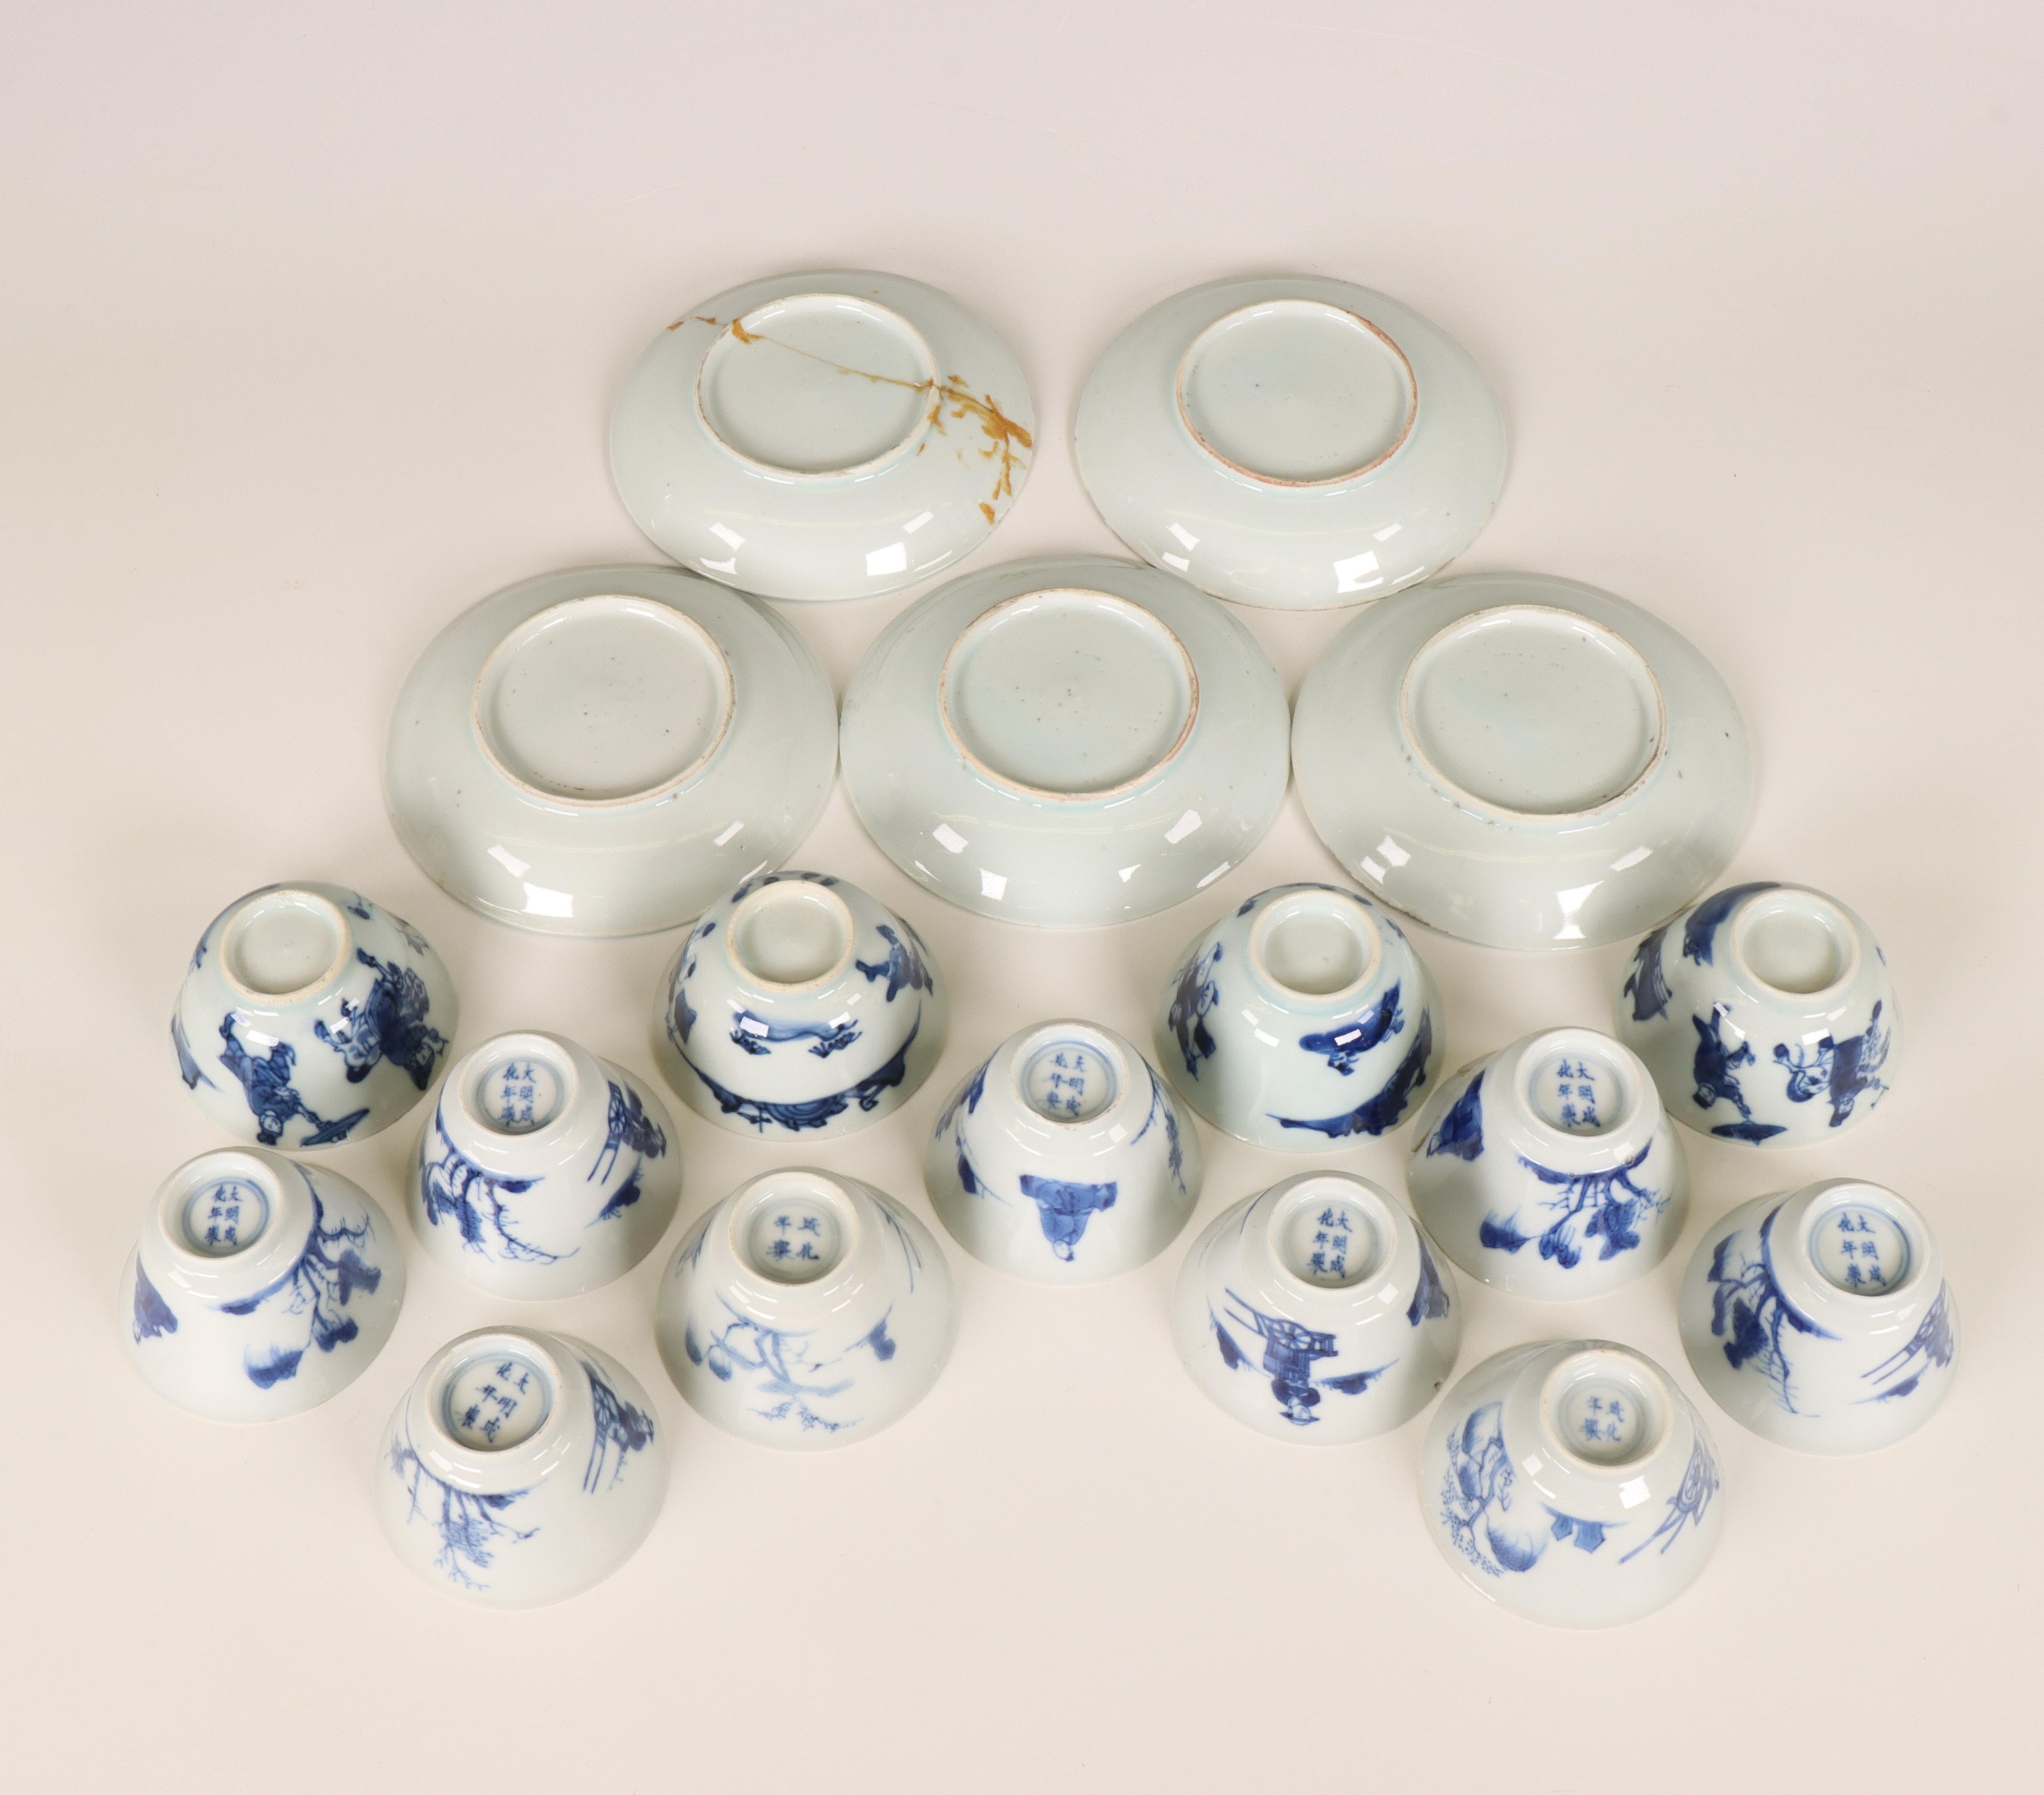 China, collection of blue and white porcelain cups and saucers, mainly 18th century, - Image 2 of 3